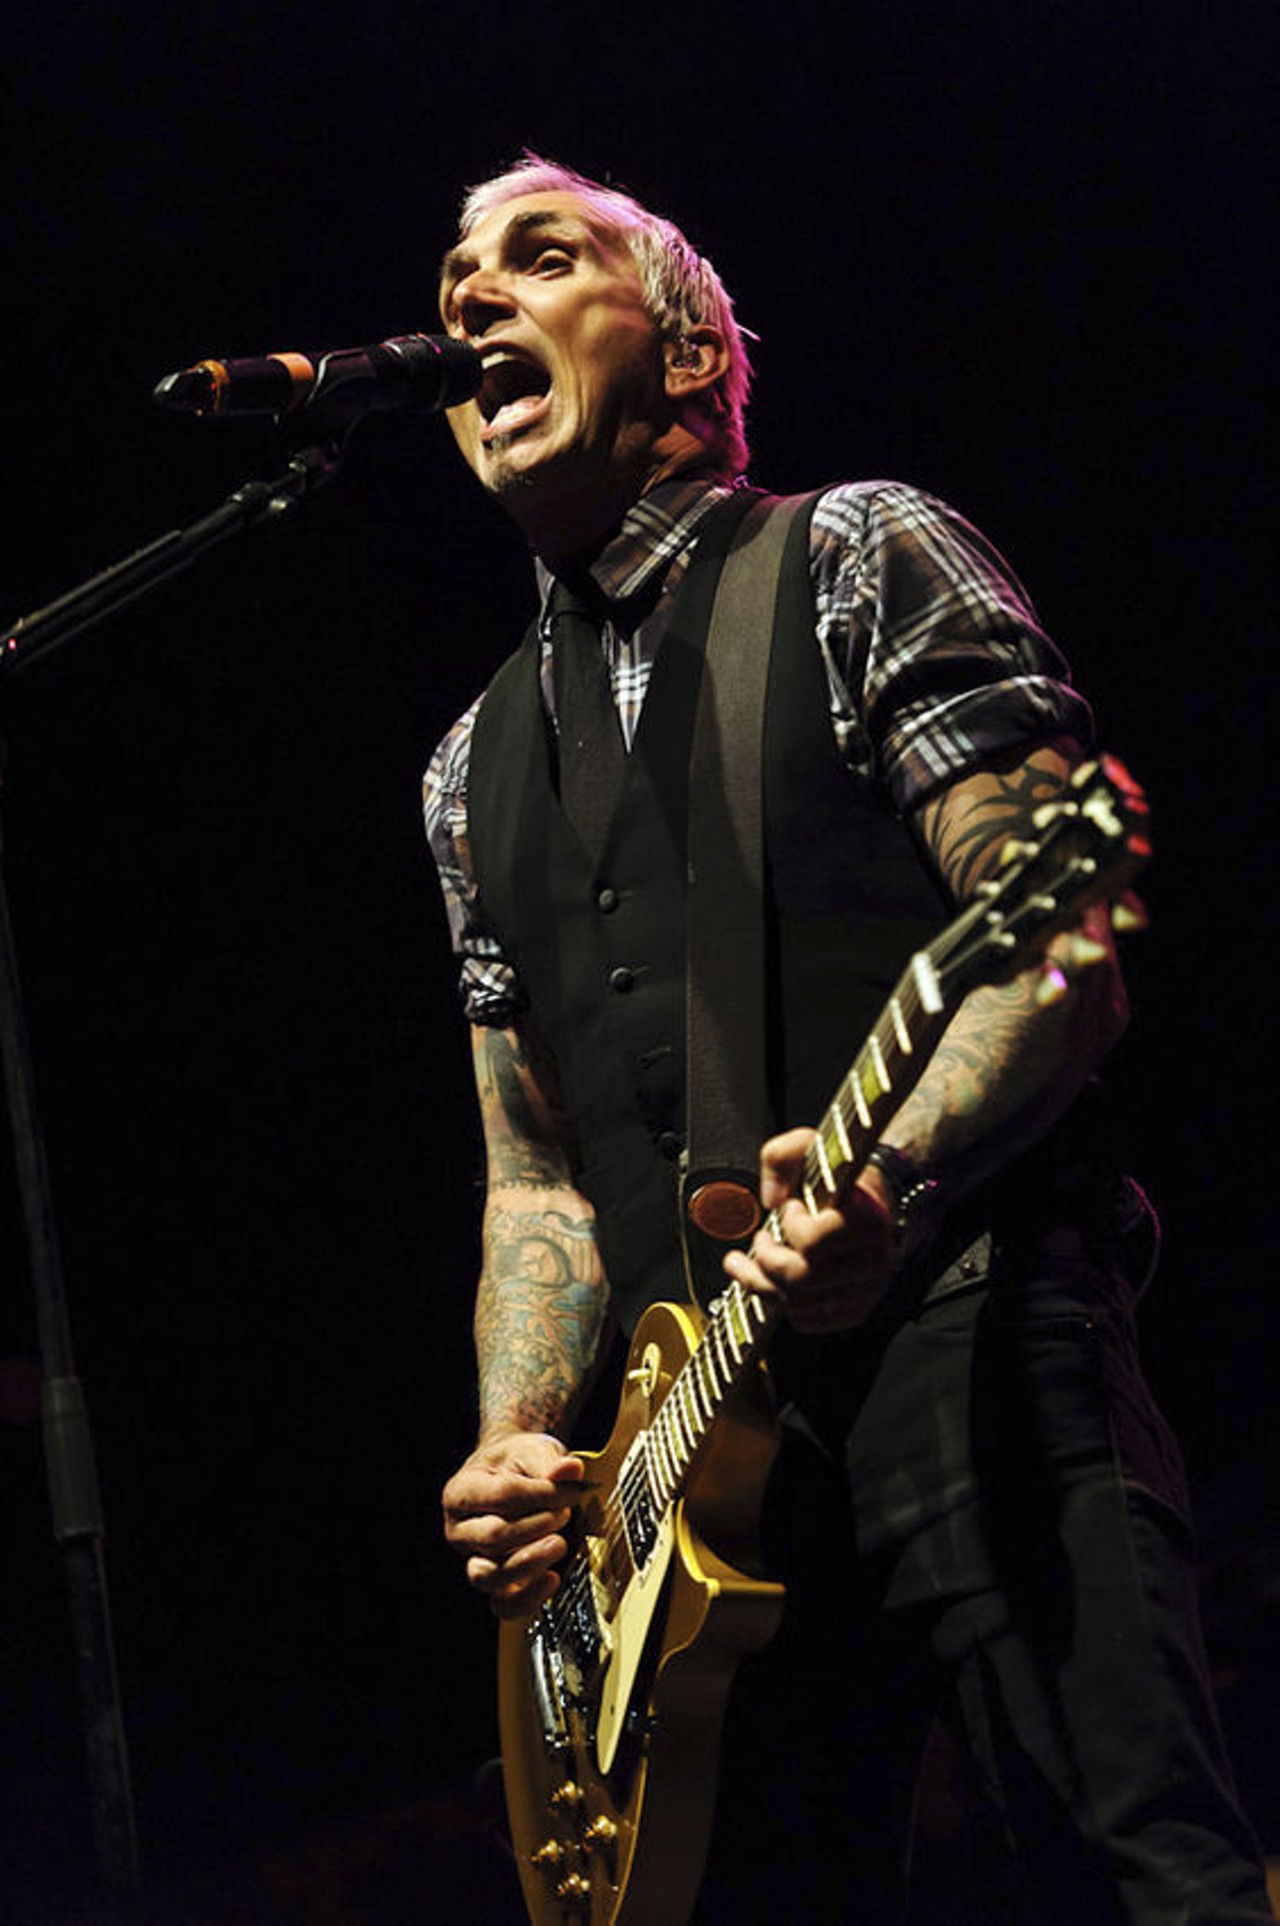 Art Alexakis of Everclear, performing as part of the Summerland Tour at The Family Arena in St. Charles. More Everclear at Summerland photos.